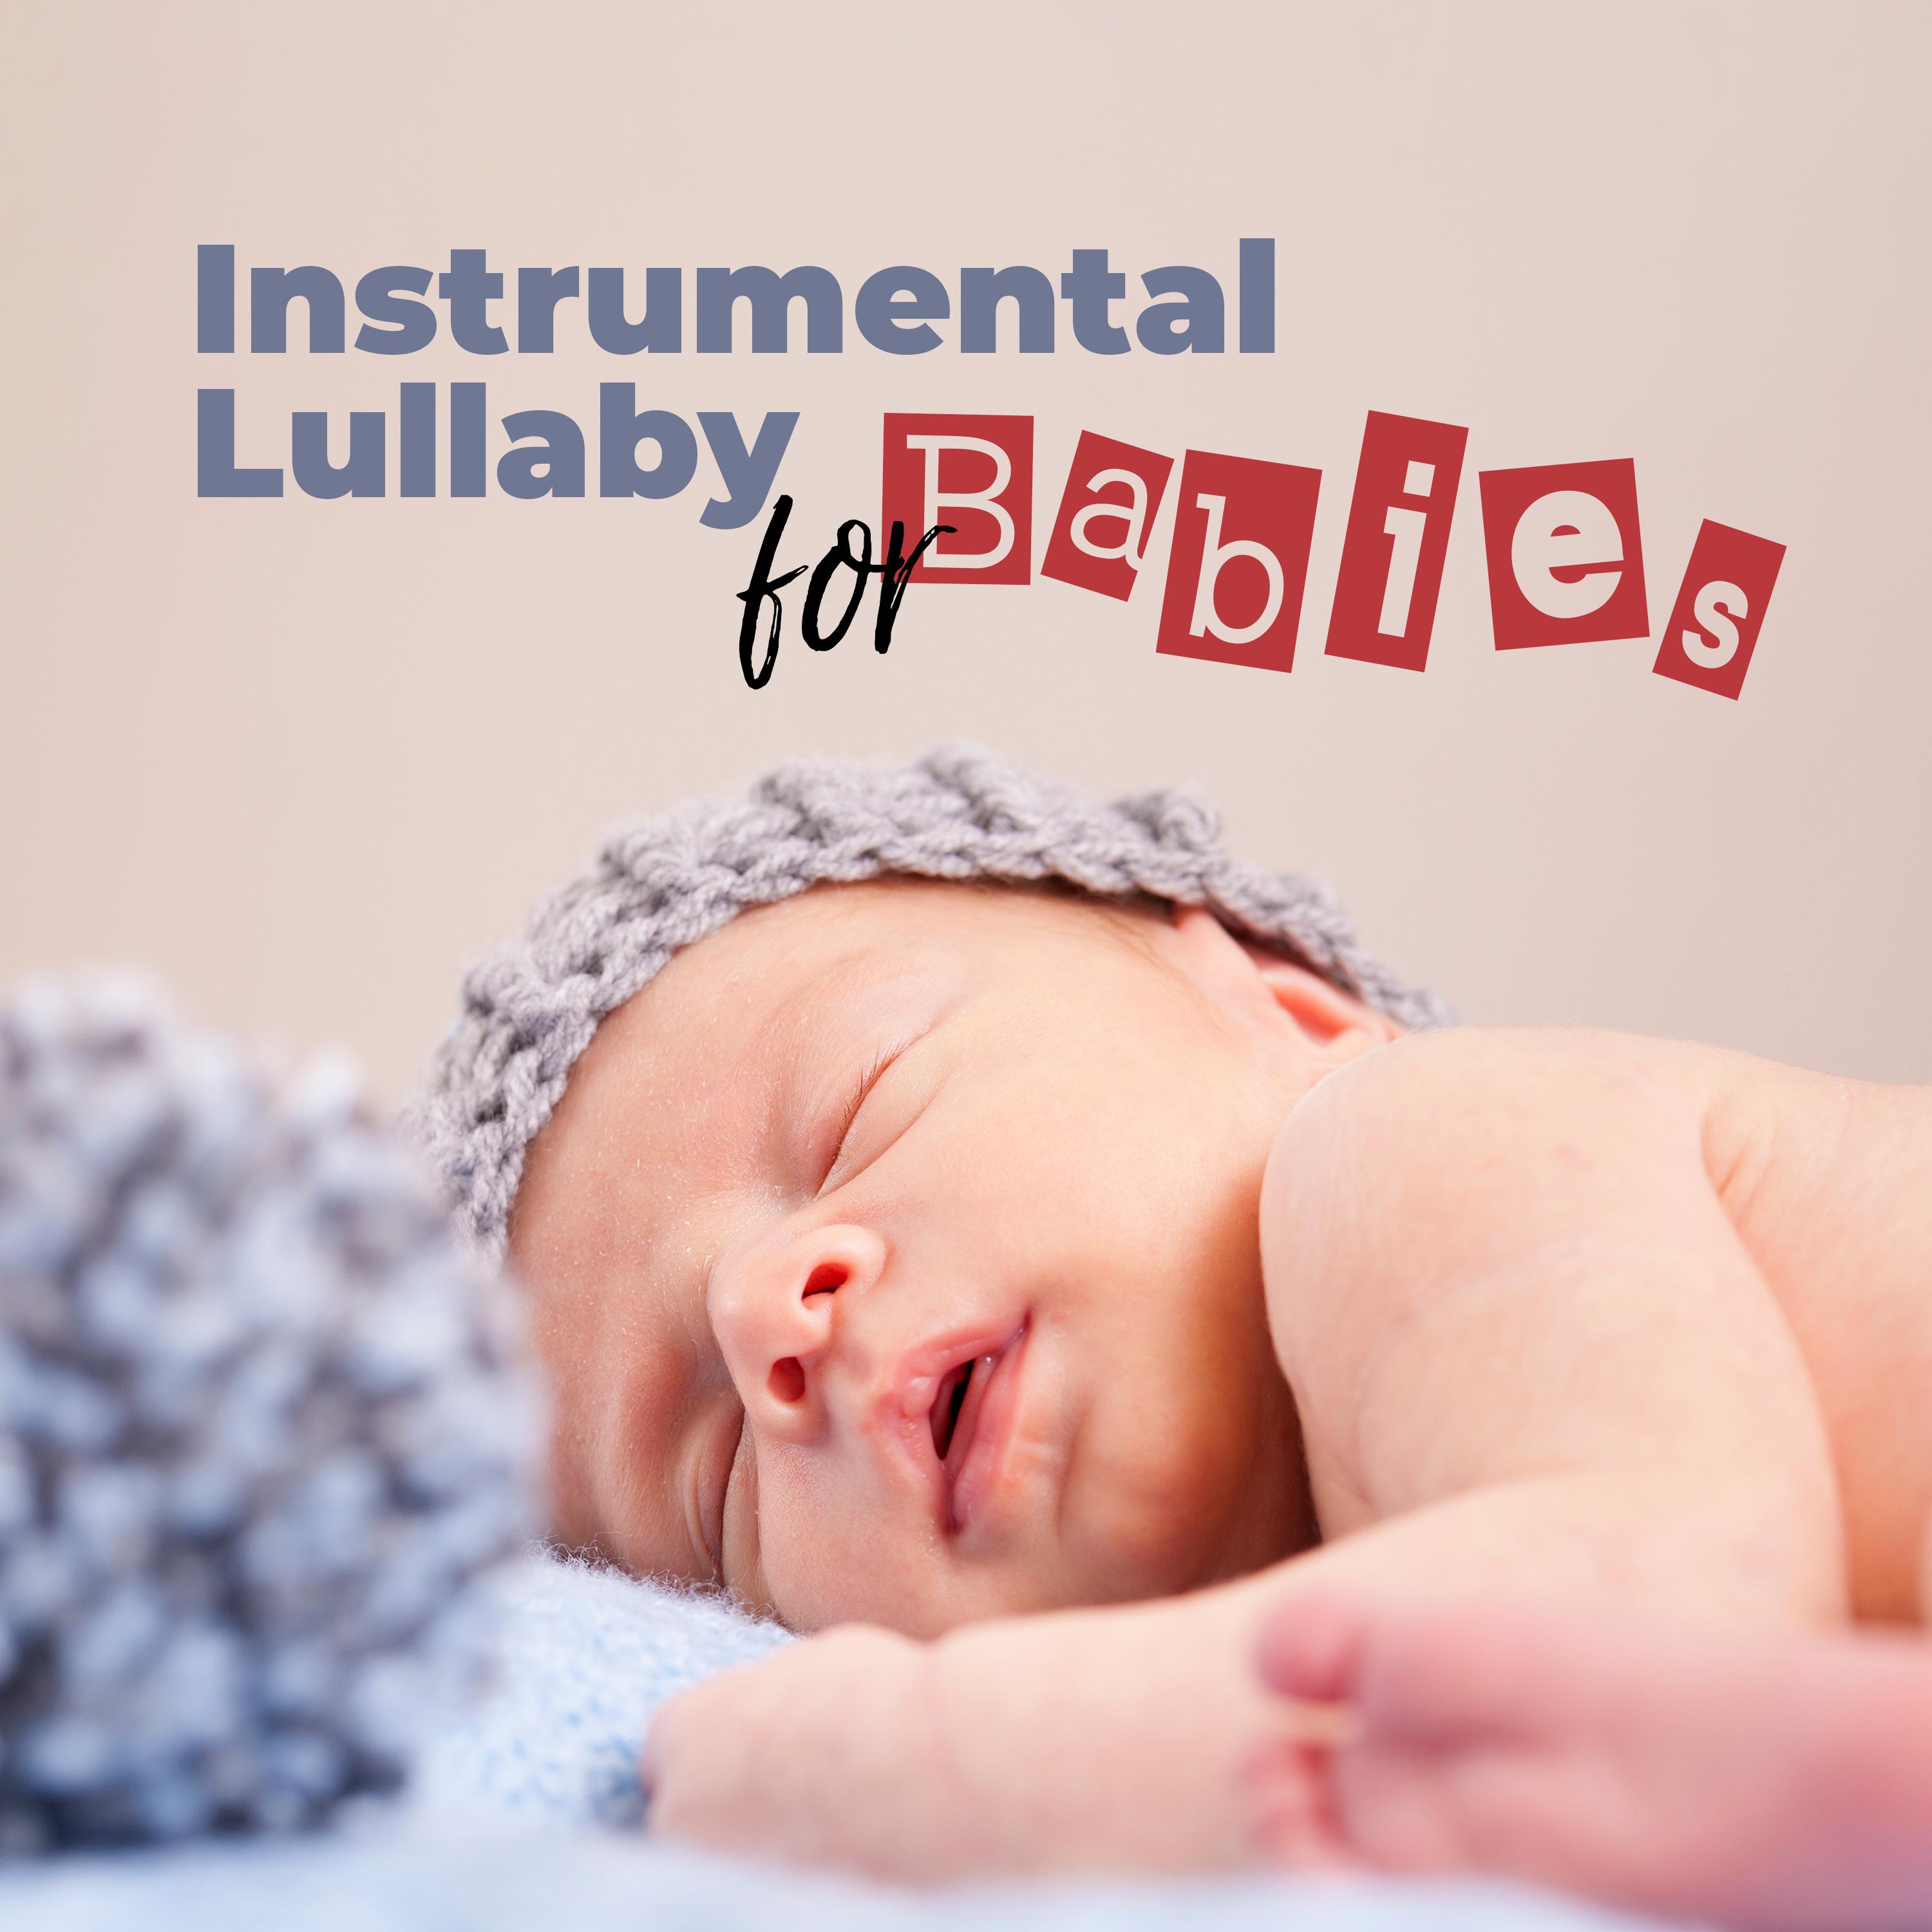 Instrumental Lullaby for Babies